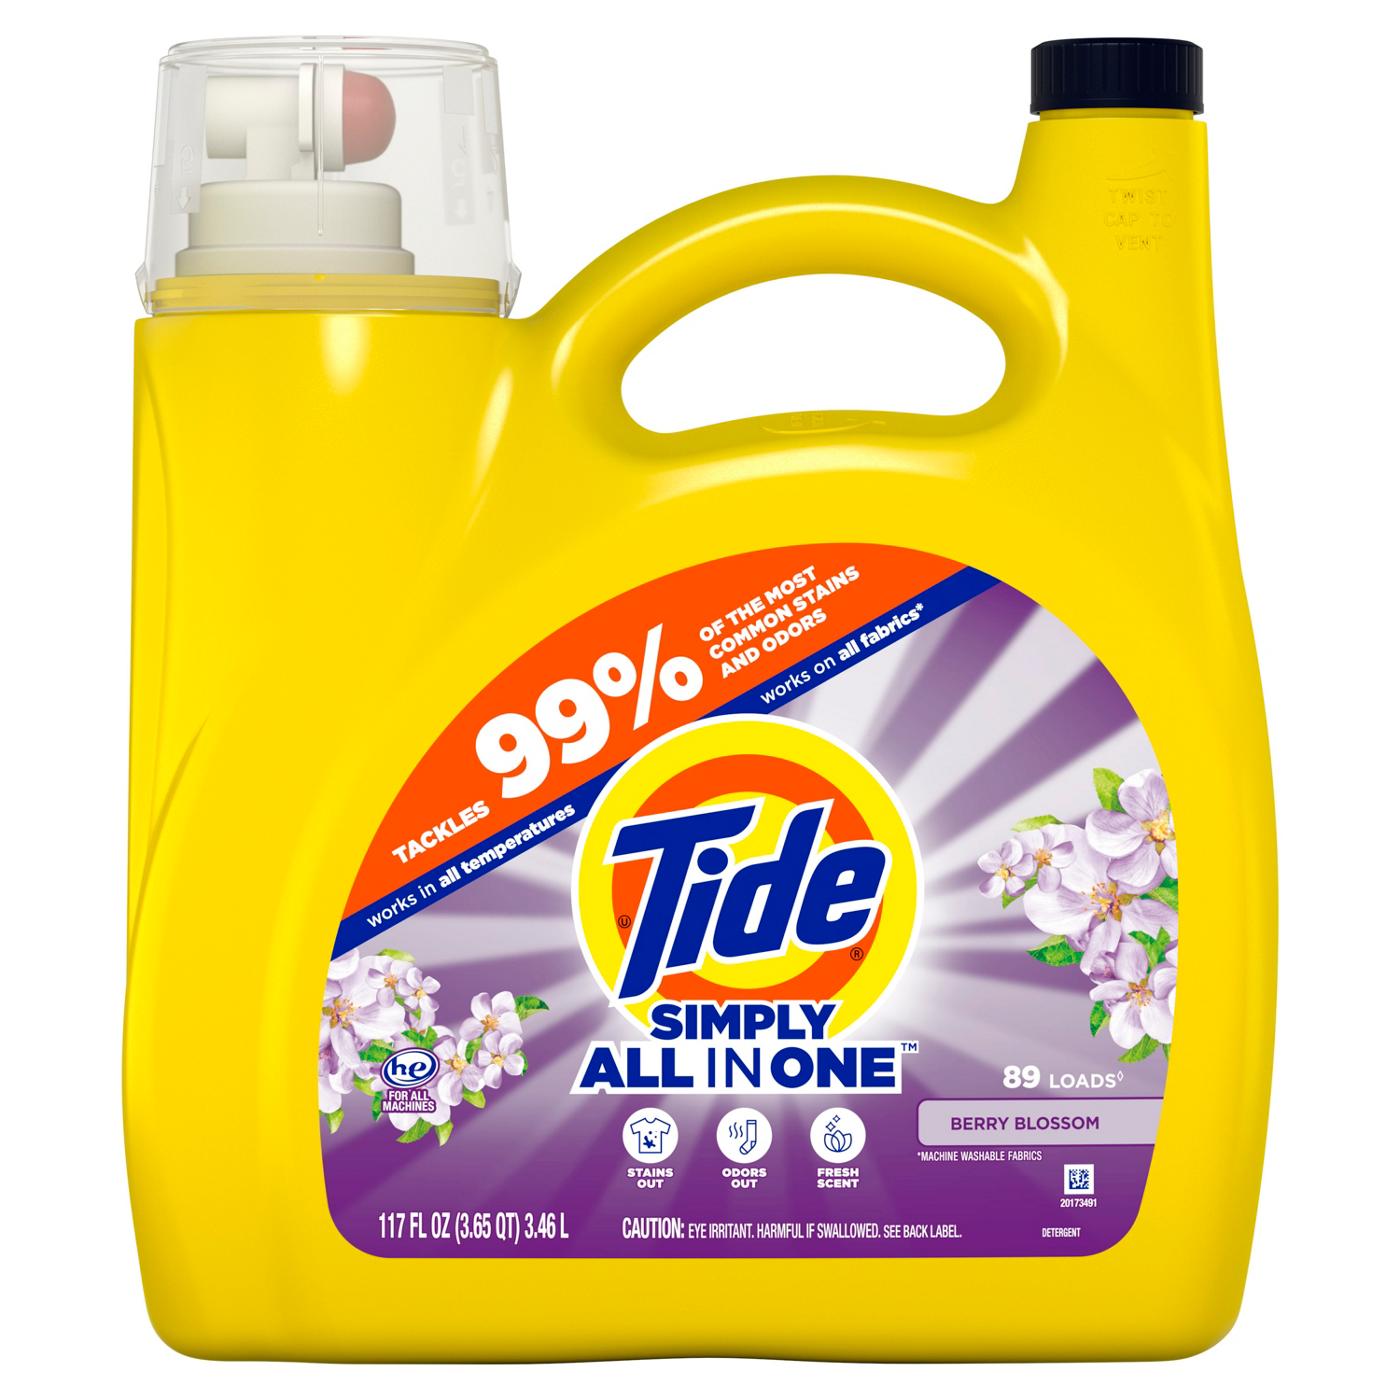 Tide Simply Clean & Fresh HE Liquid Laundry Detergent, 89 Loads - Berry Blossom; image 1 of 14